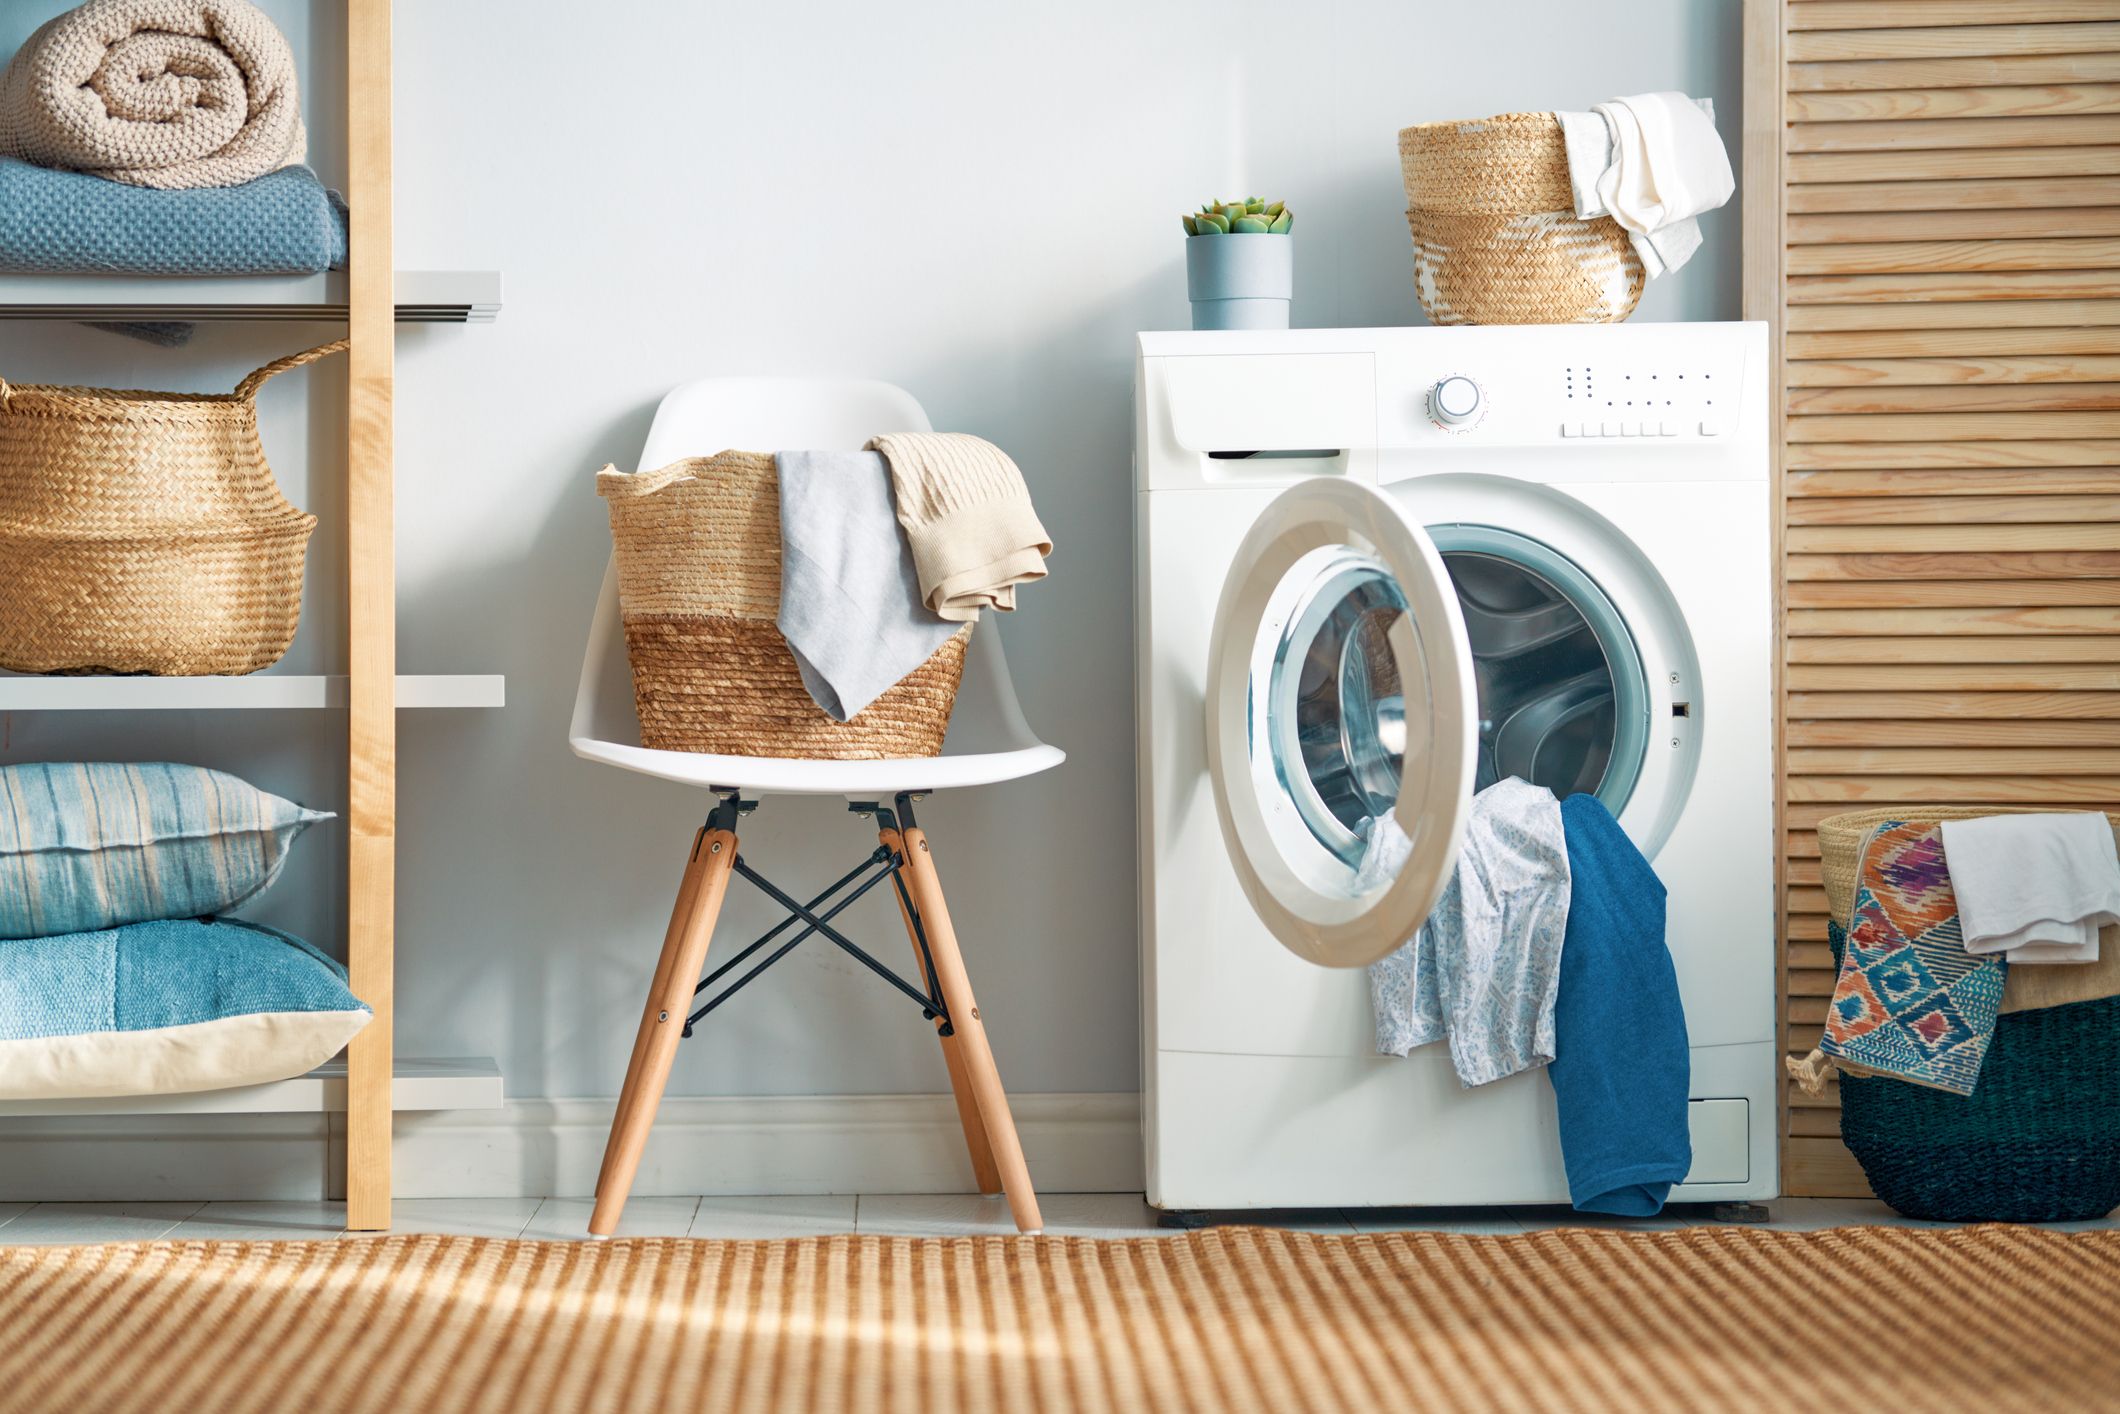 30+ Best Laundry Room Ideas - Clever Laundry Room Storage Ideas